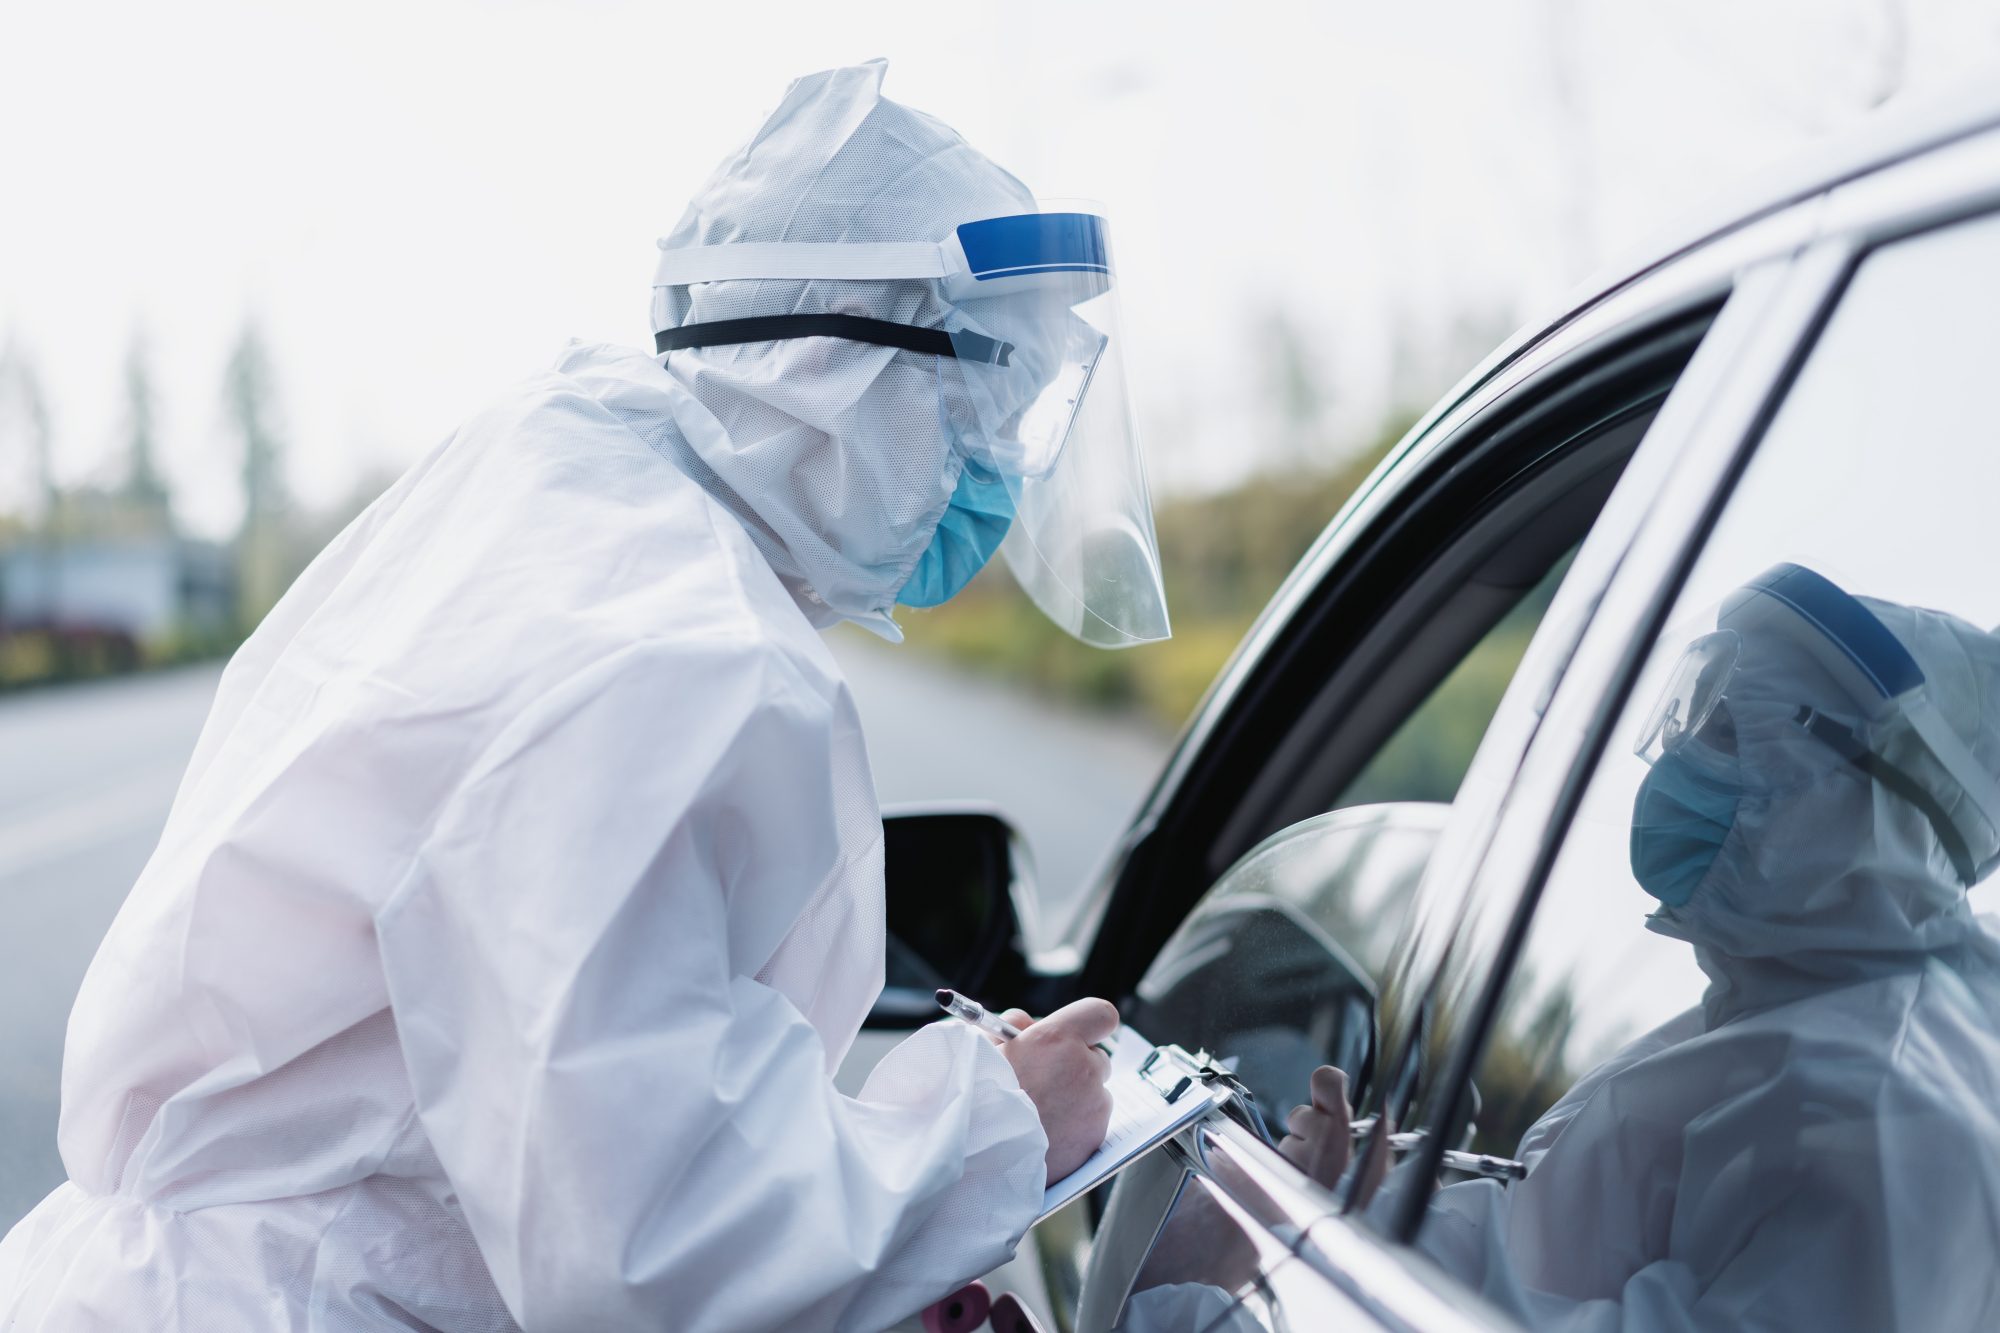 a medical worker conducts COVID-19 testing at a car window